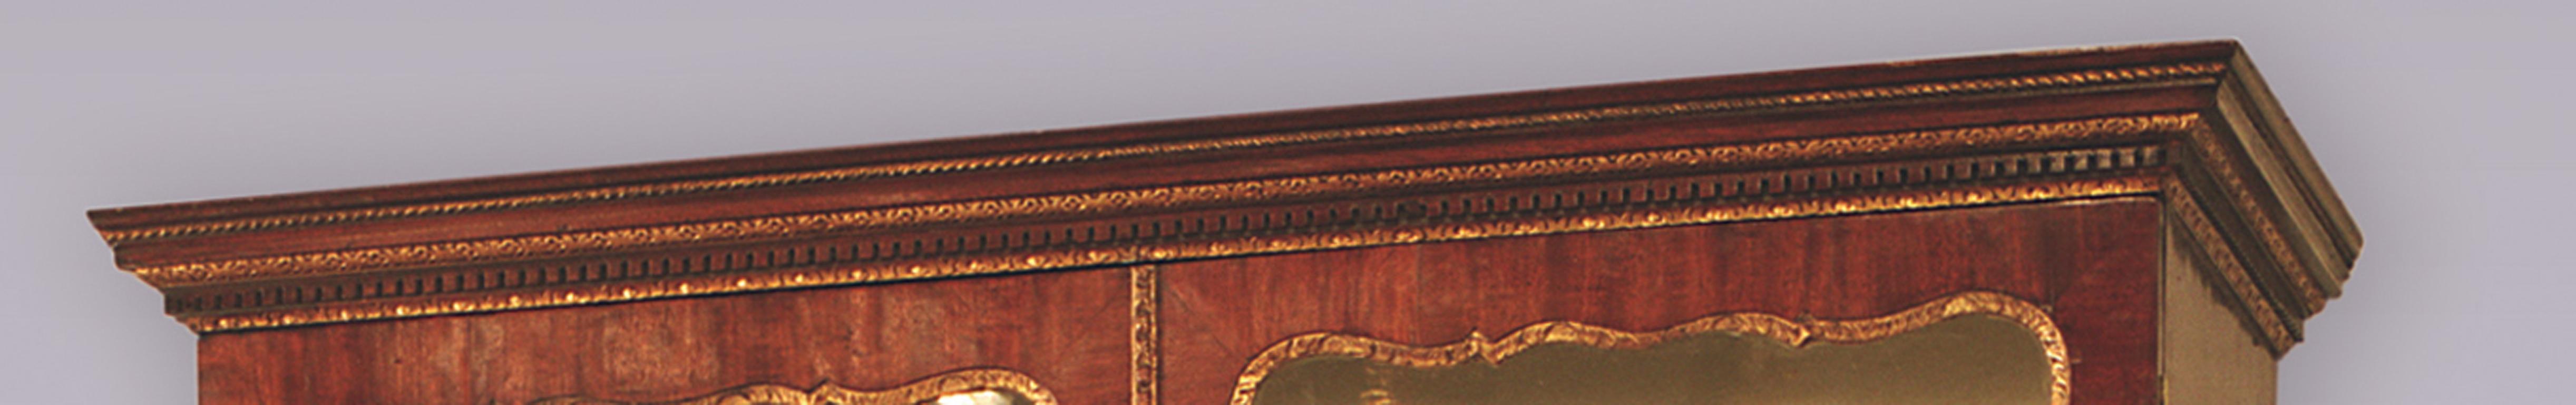 George II Mid 18th Century Mahogany and Gilt Display Bookcase For Sale